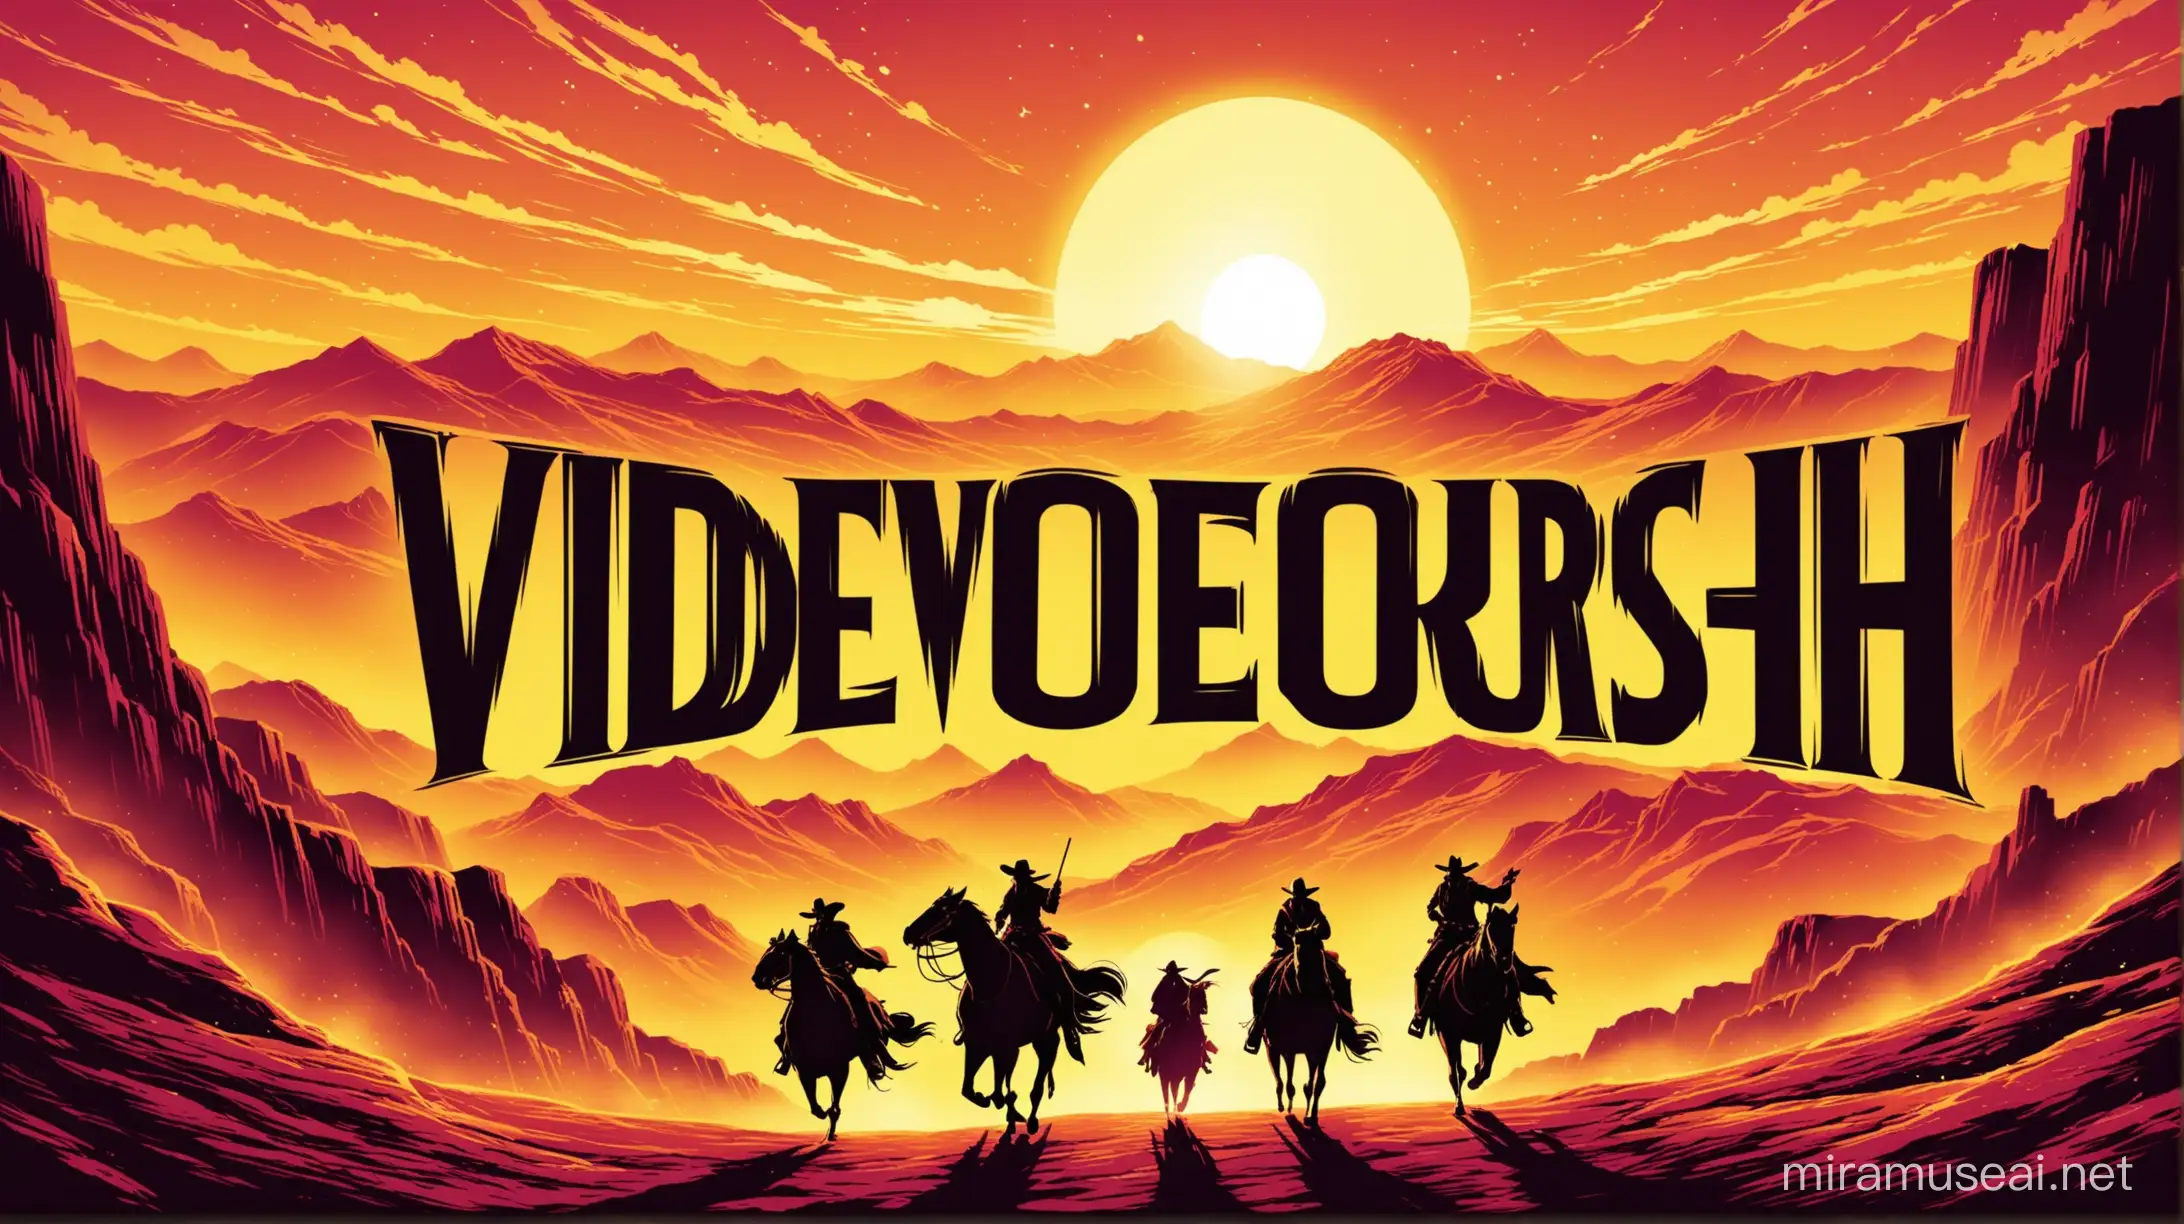 imagine make a movie poster with fantasy western genre, concept is : film graduate students DOING ADVENTURE for MAKING MOVIE IN Hollywood title is 'VideoRush'